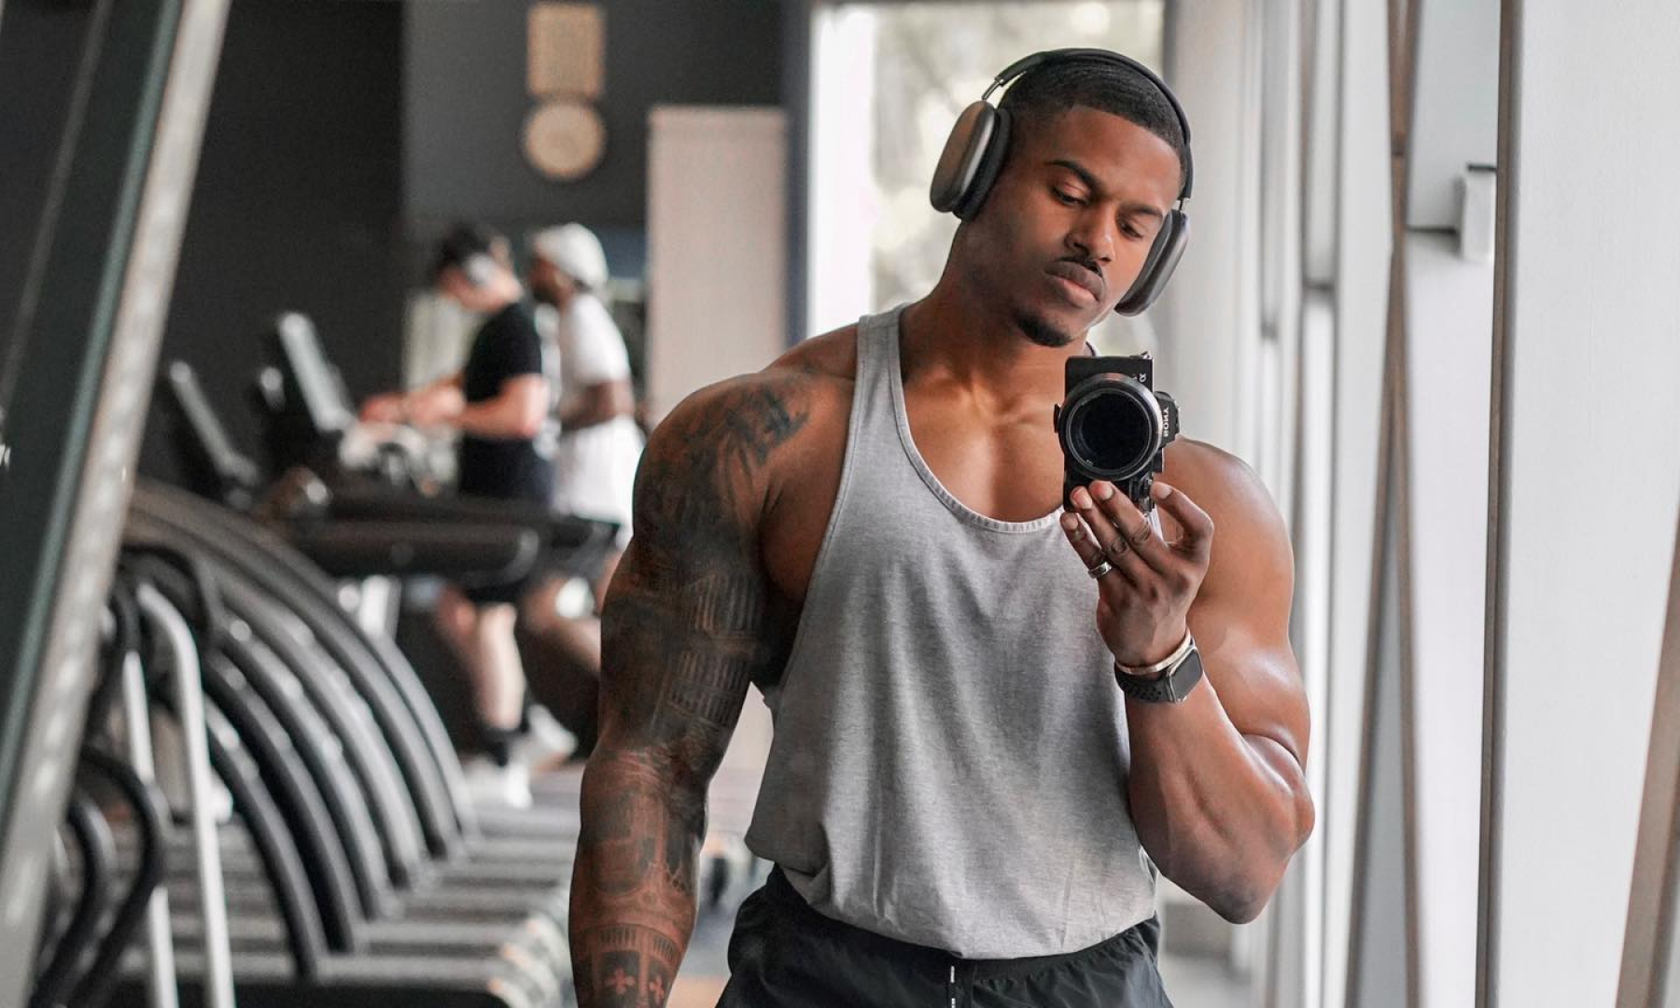 Top 5 Male Fitness Influencers to Follow on Instagram - ELMENS